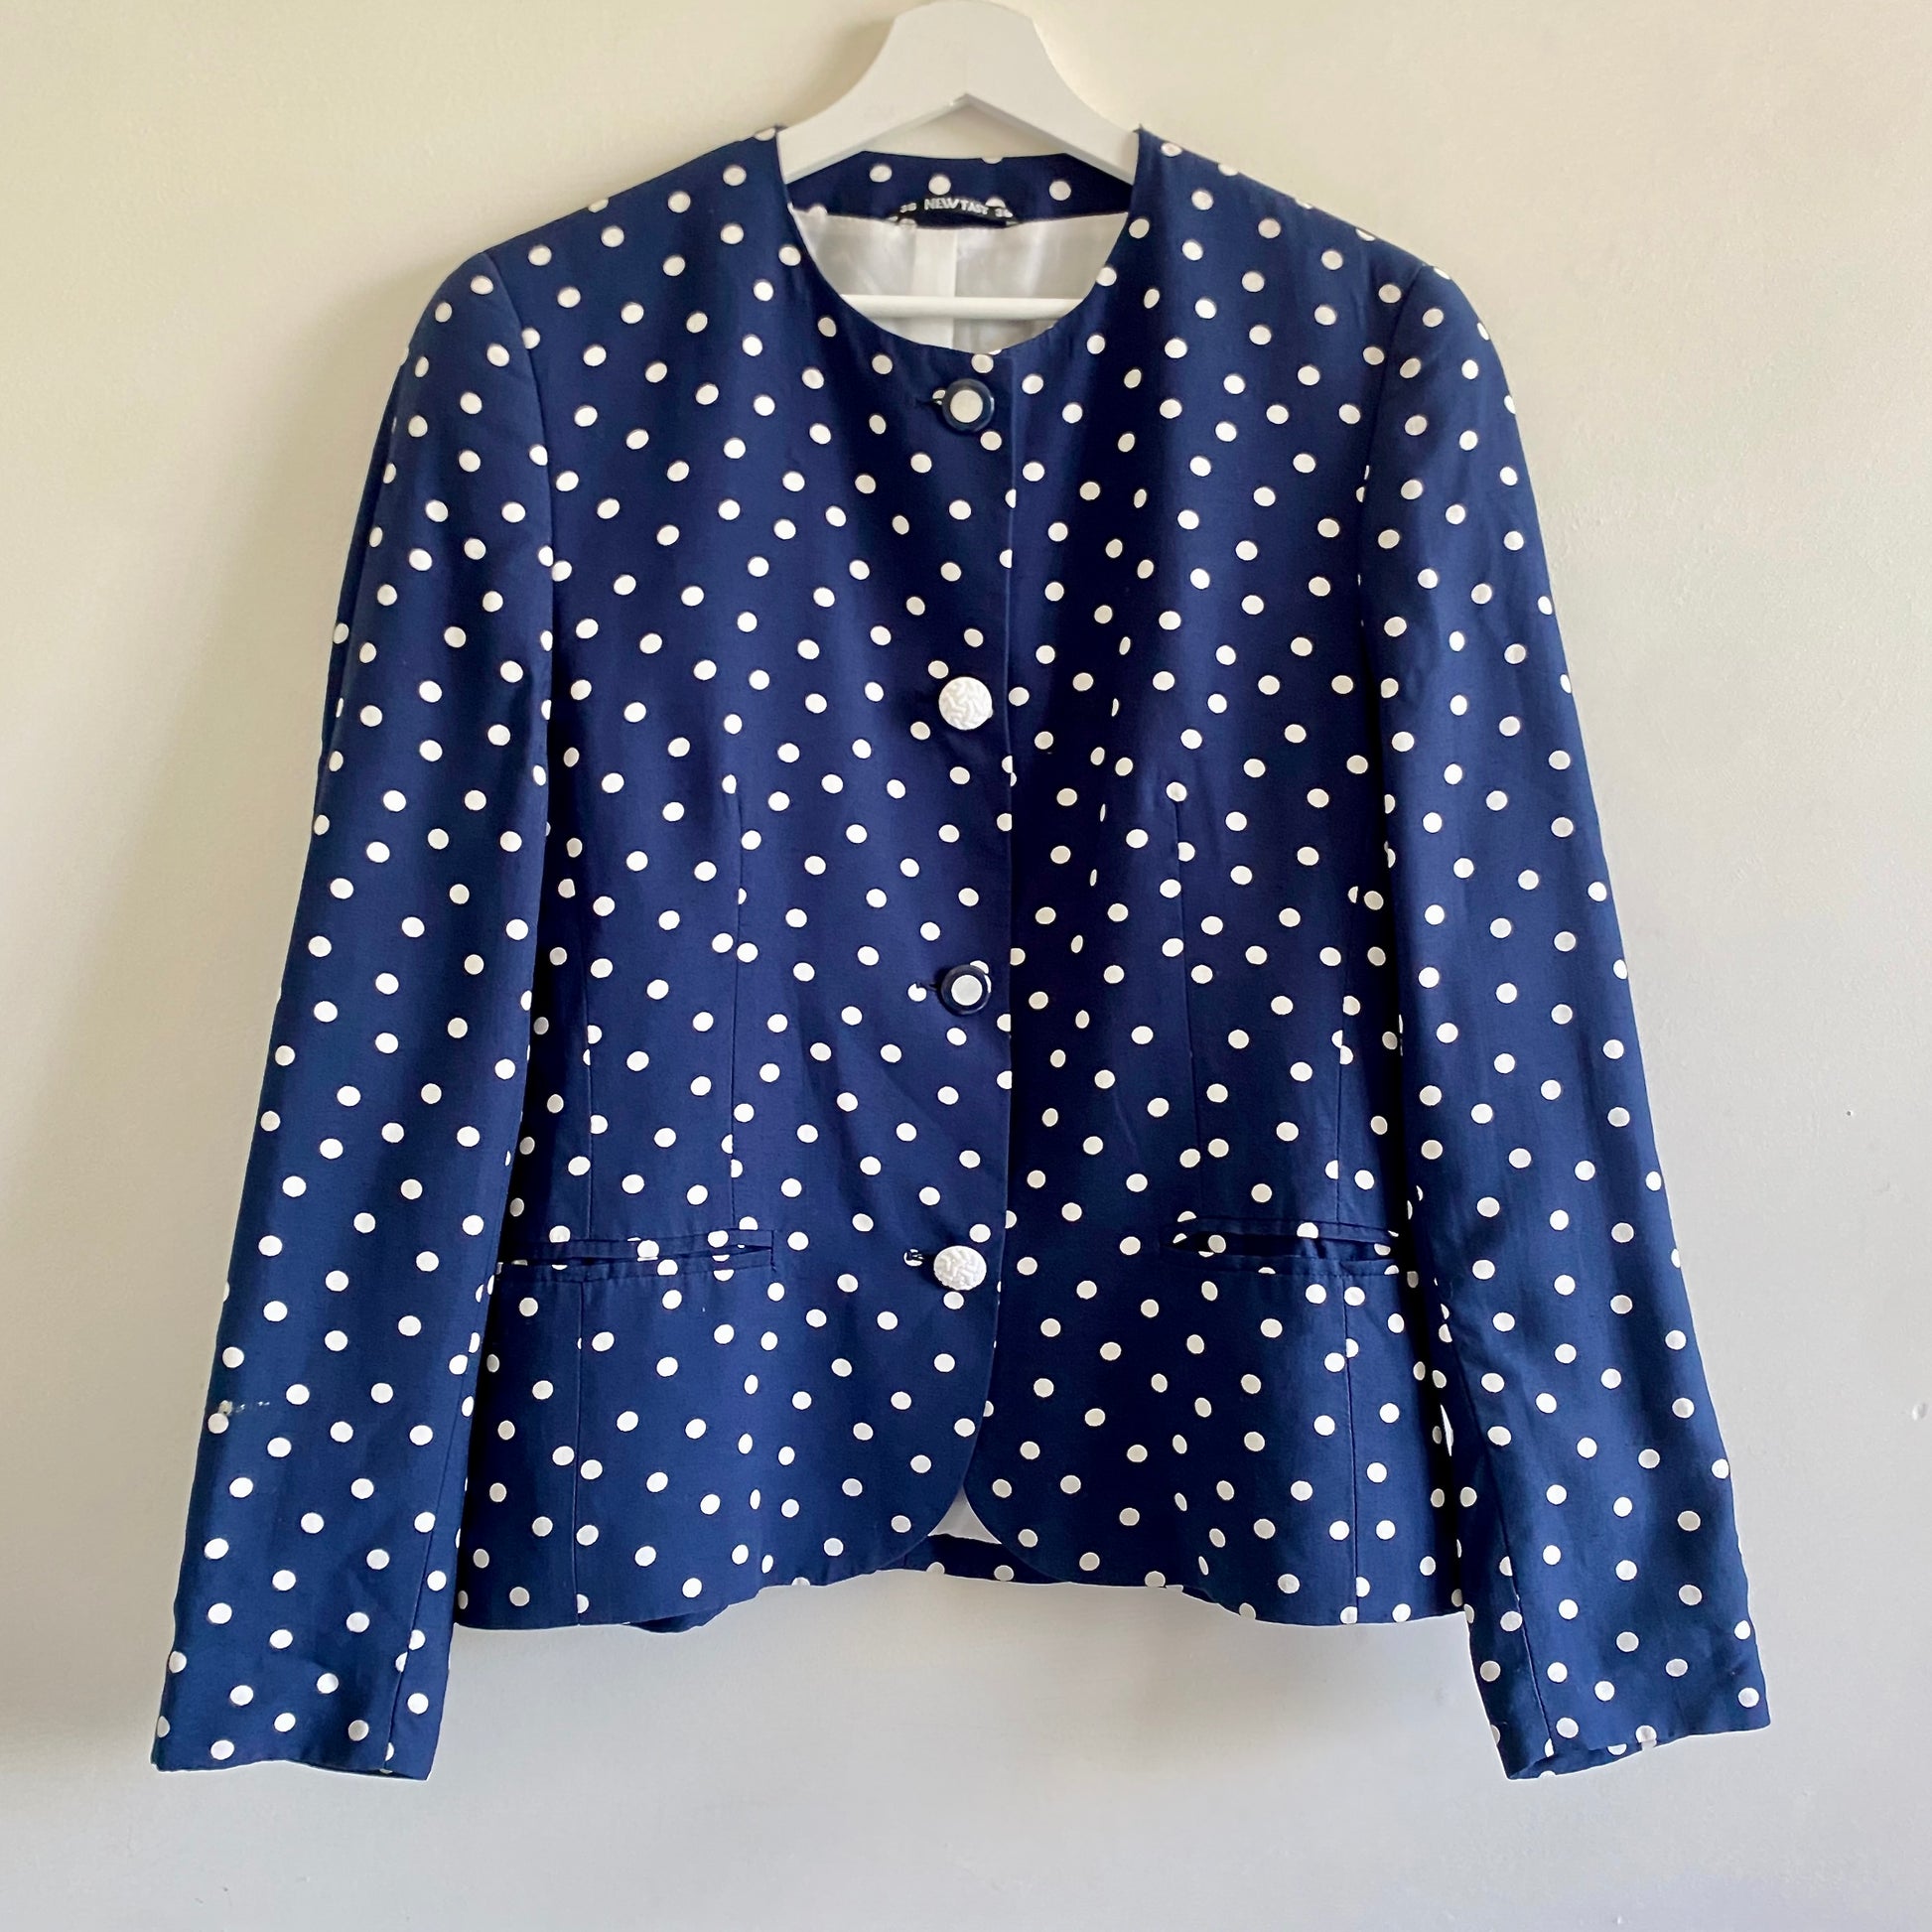 80s vintage navy spotted jacket By New Fast at C&A Round neckline Button front fastening with decorative mismatched  buttons Two pockets to front Fully lined 100% Viscose with Polyester lining Machine washable